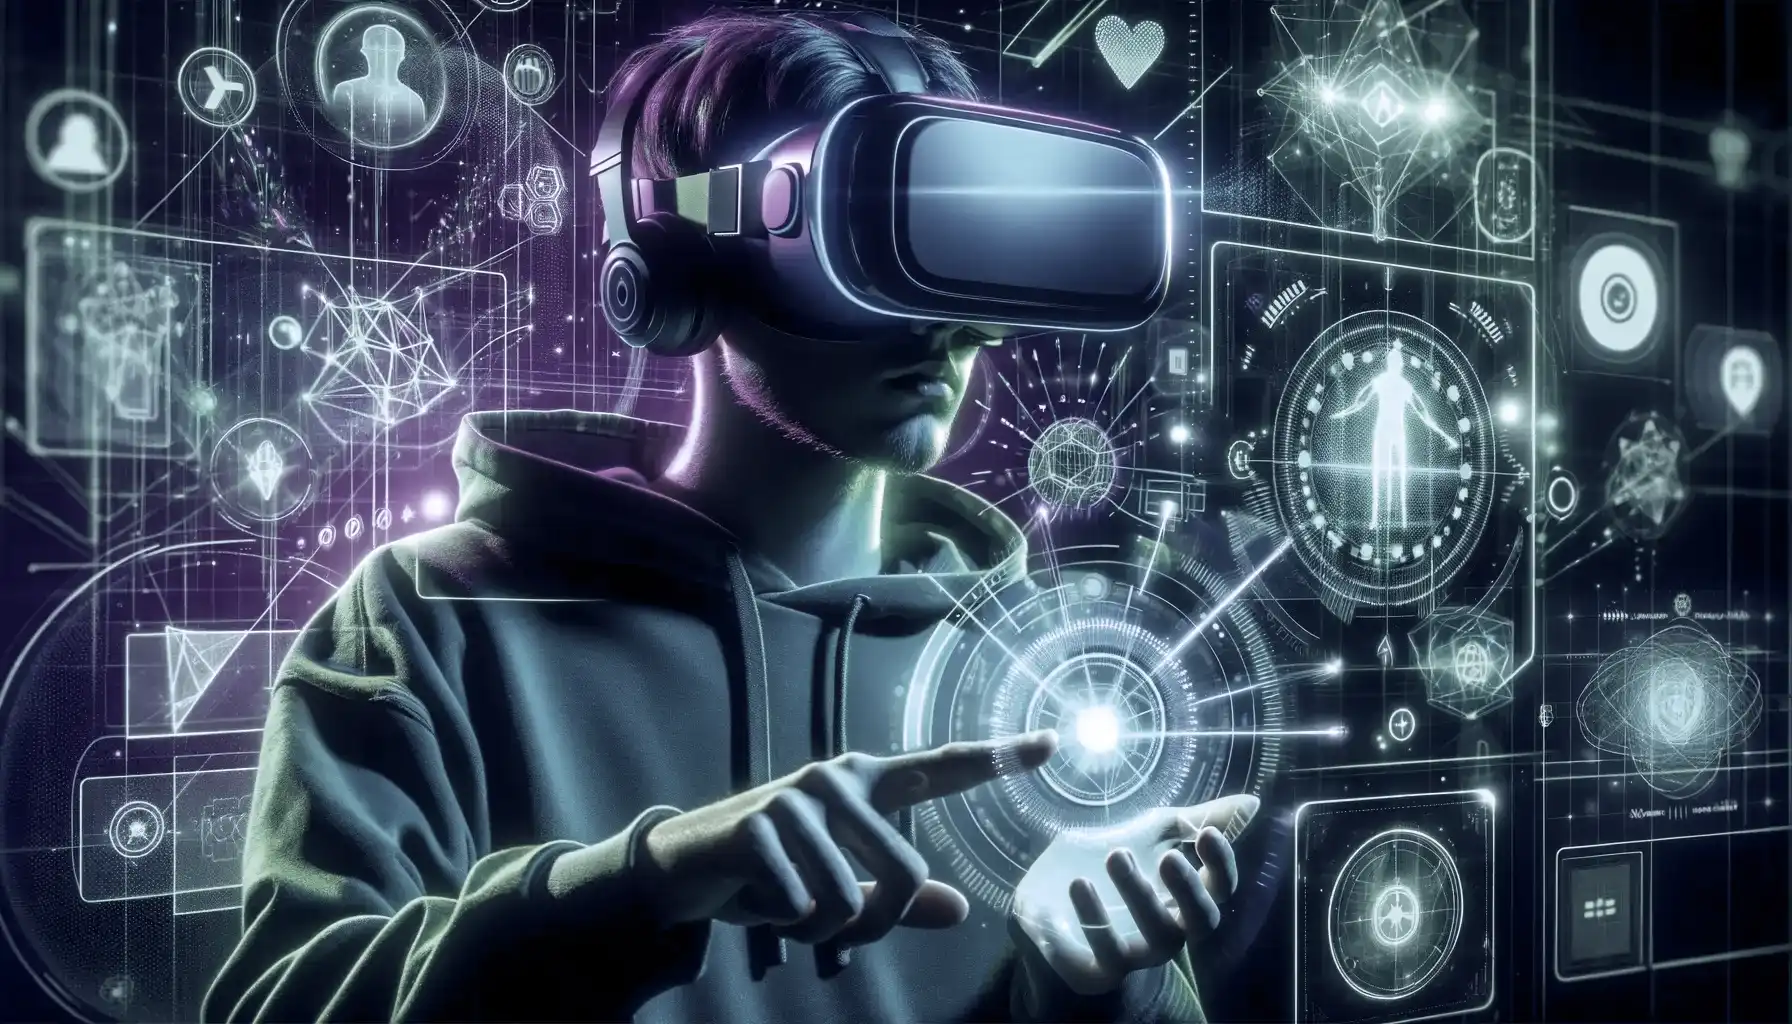 Image depicting a person immersed in an AR/VR experience, wearing advanced goggles. They are surrounded by a vibrant display of neon green and purple lights, which cast an ethereal glow over the scene. The background is filled with abstract digital graphics and symbols, representing the virtual world. The person's gestures indicate interaction with these virtual elements, highlighting the immersive and cutting-edge nature of AR/VR technology